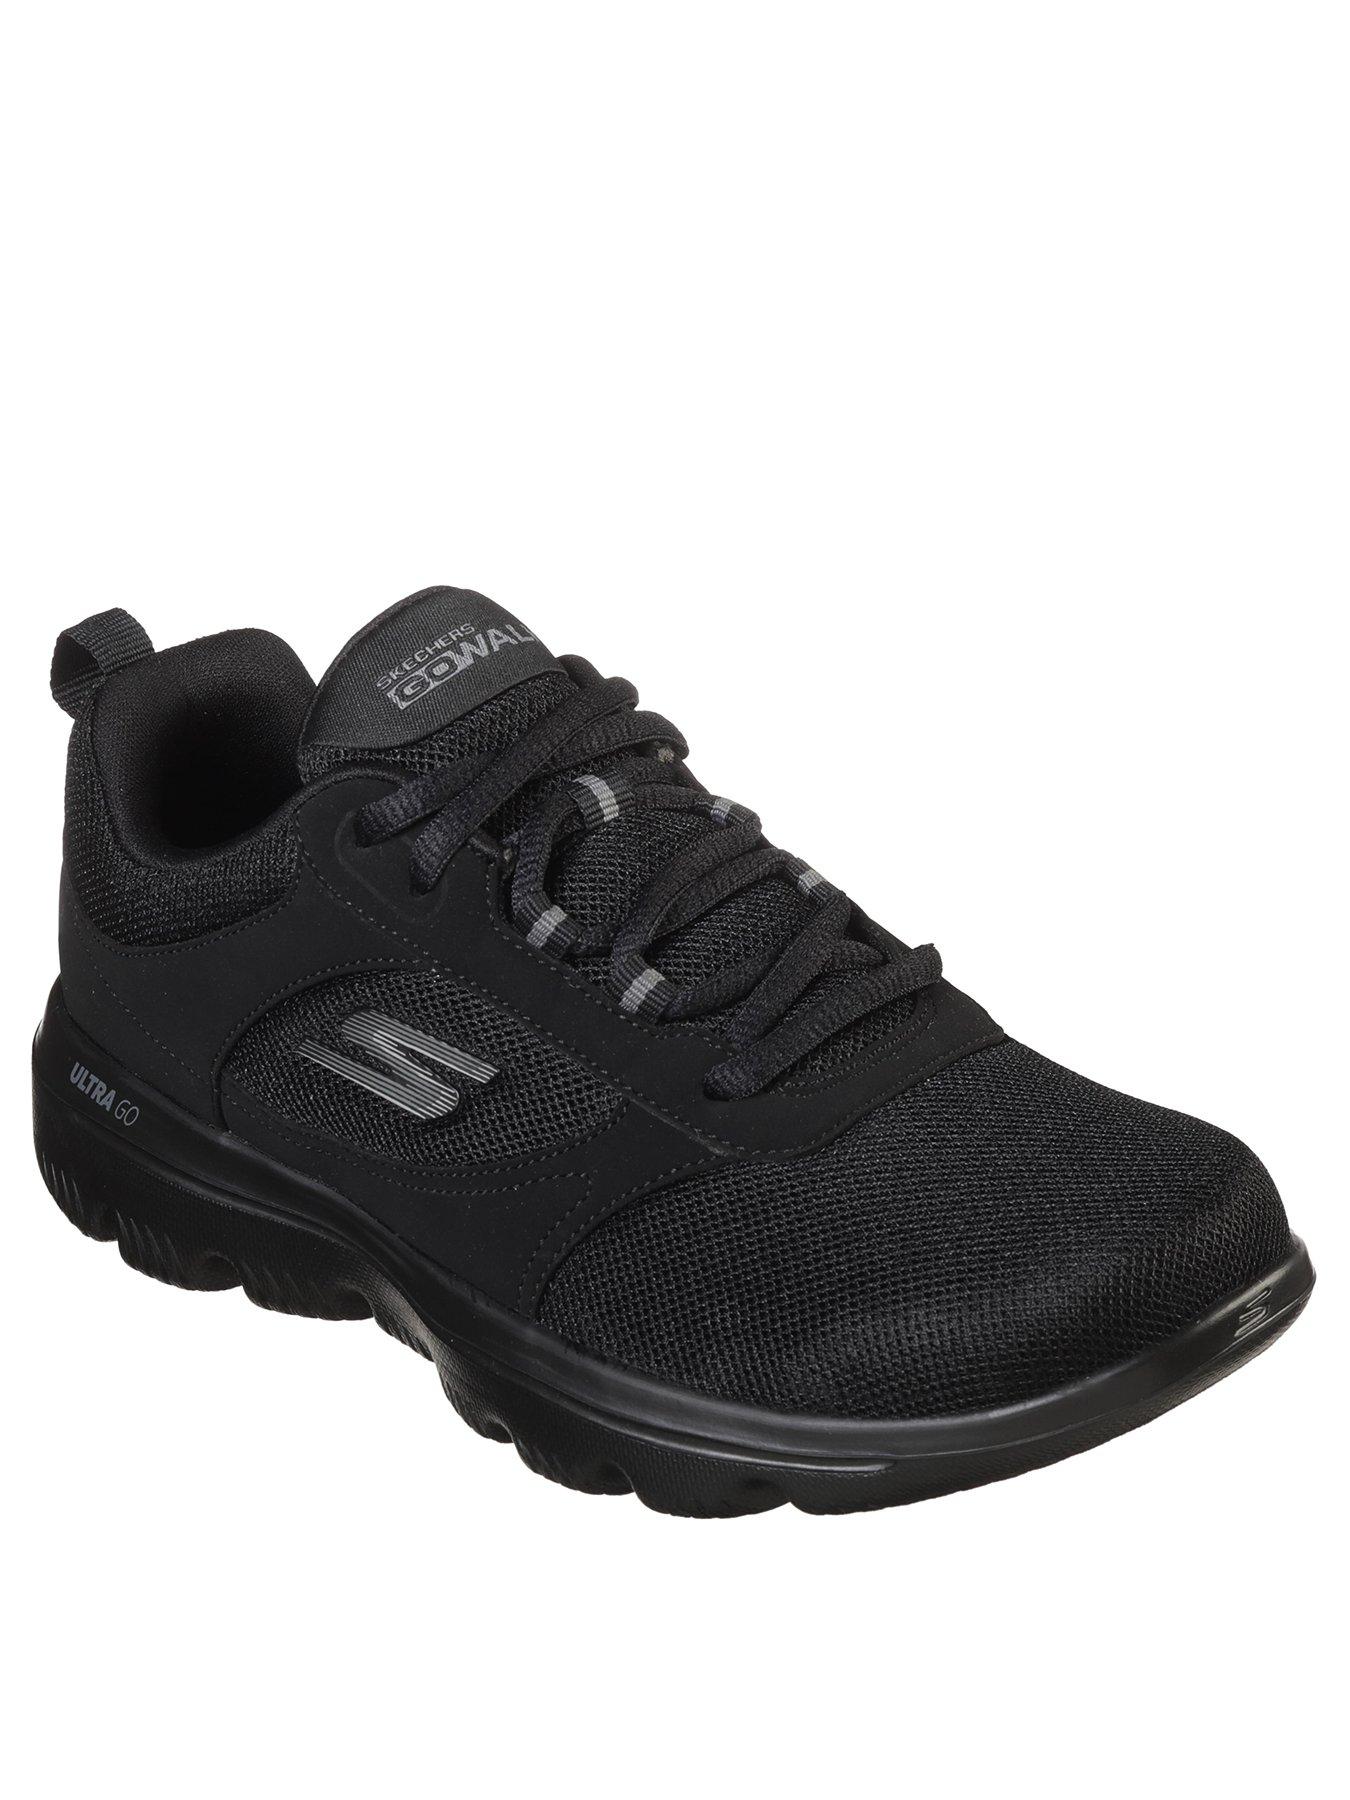 skechers wide fit boots